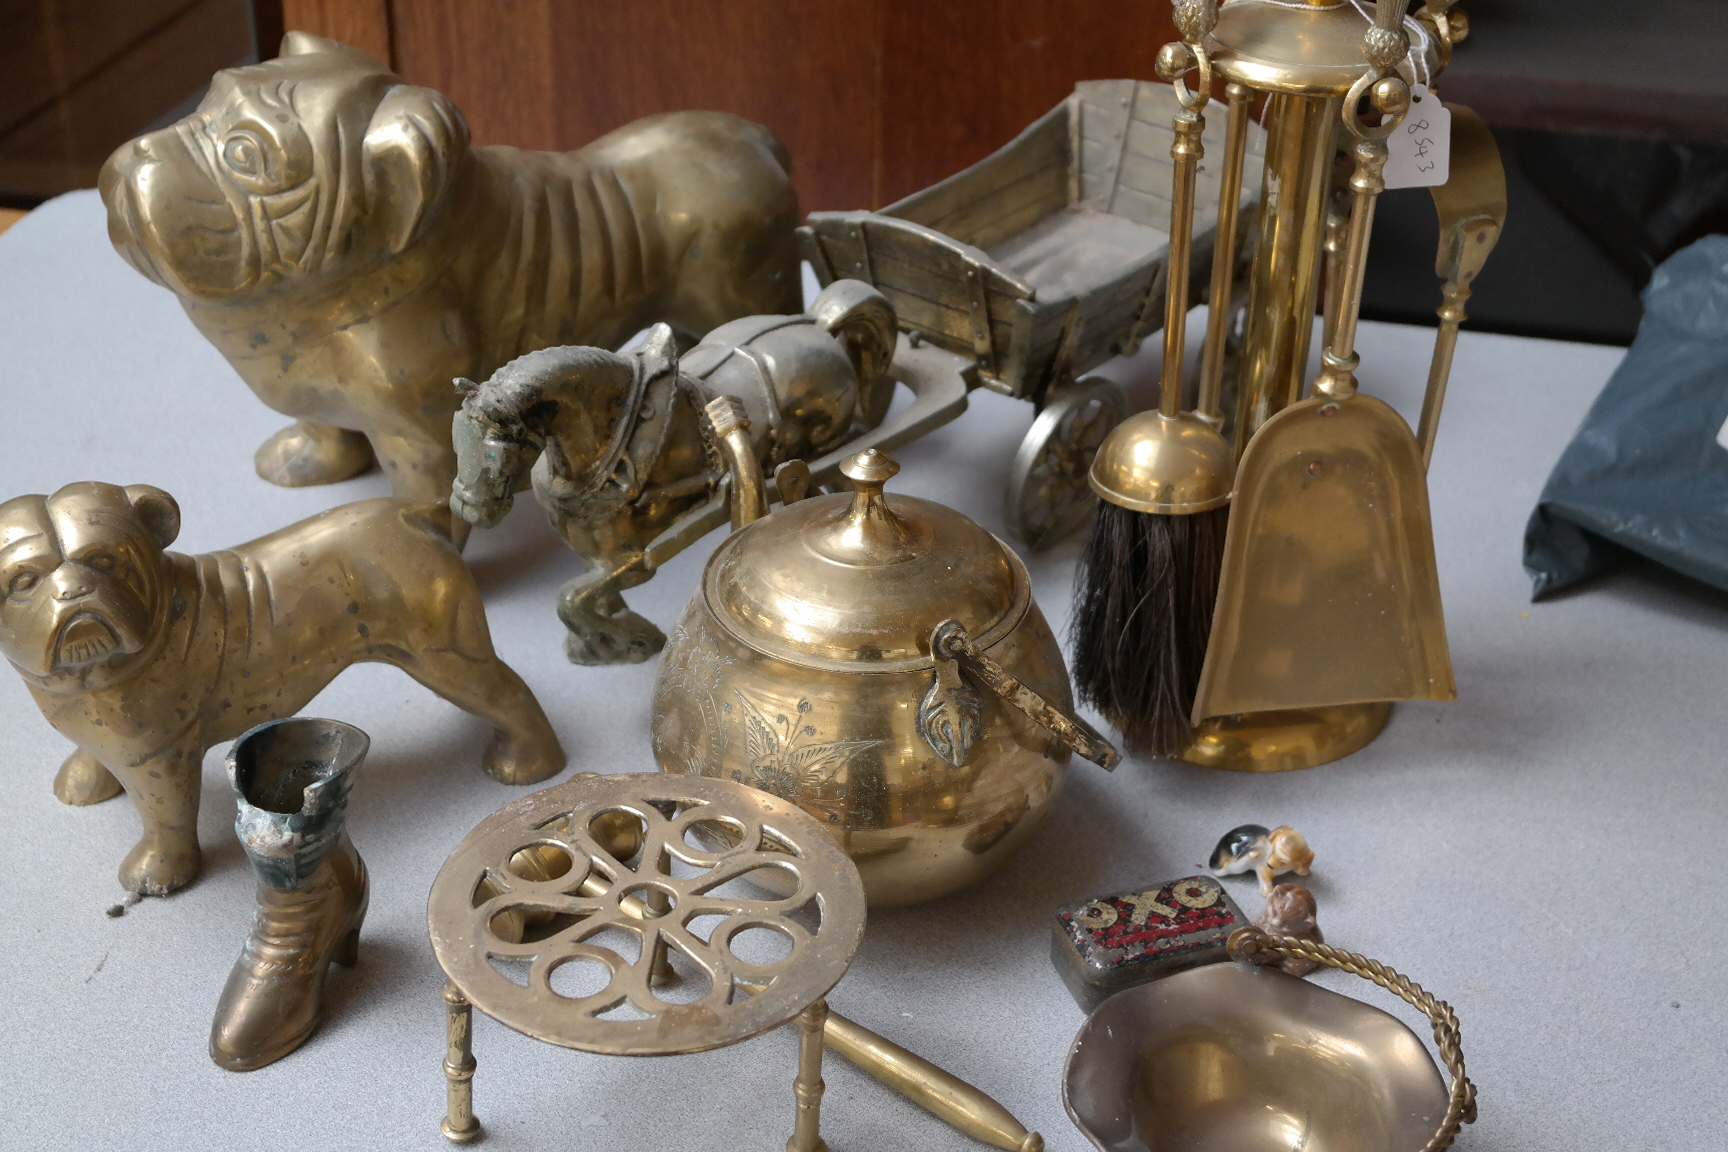 Collection of Brassware